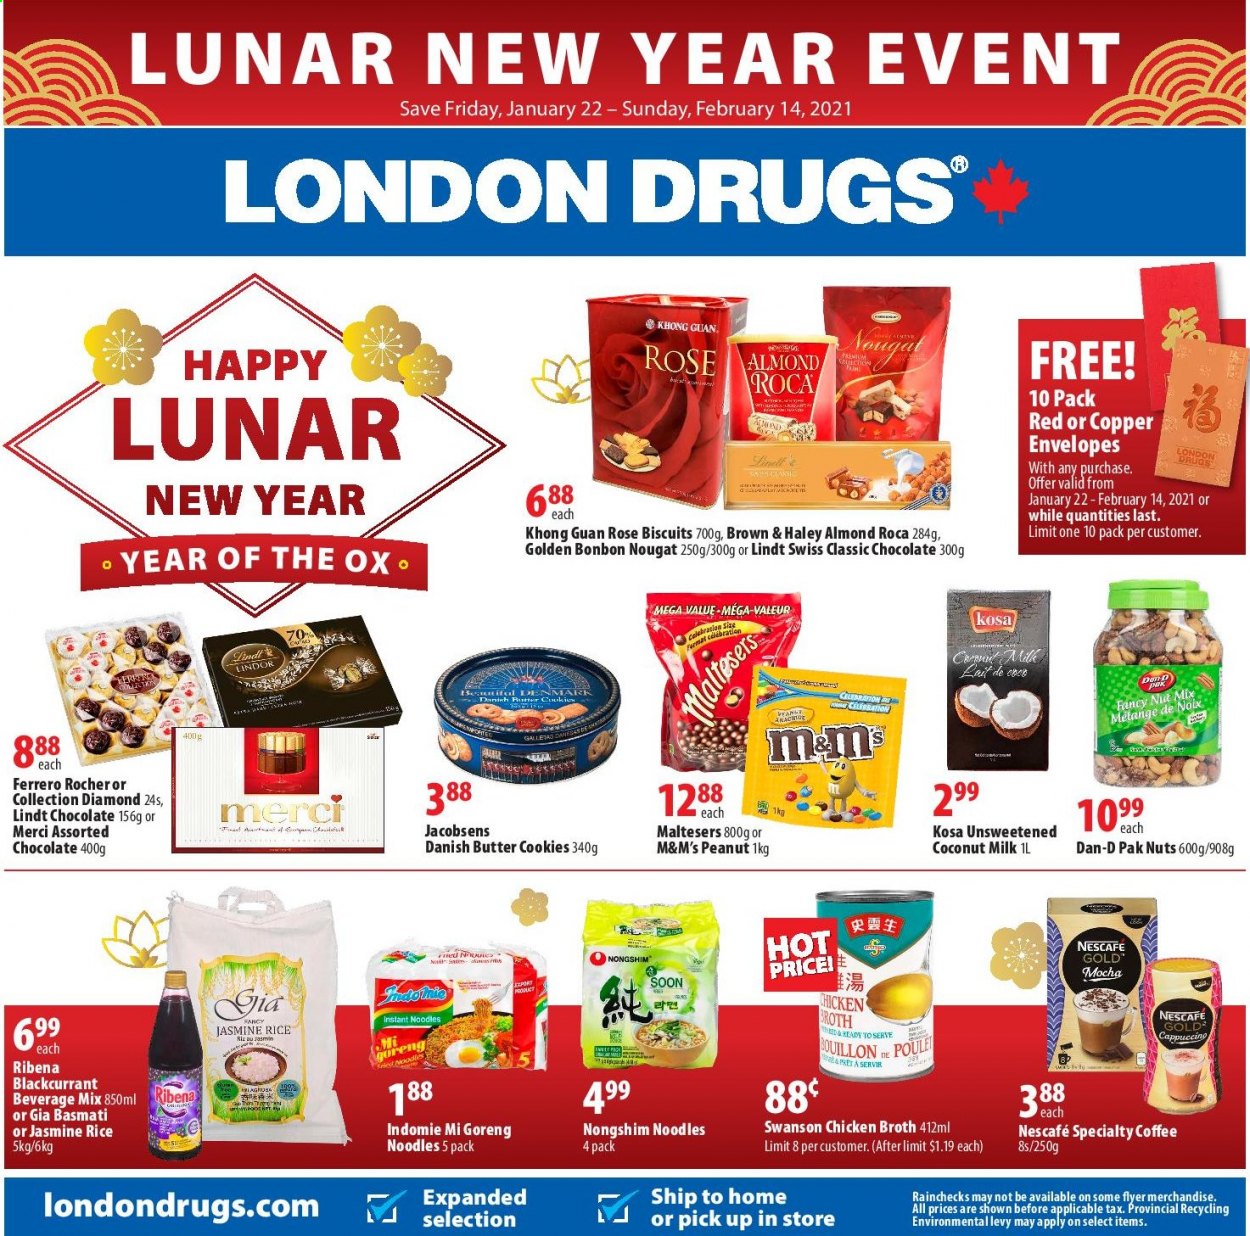 thumbnail - London Drugs Flyer - January 22, 2021 - February 14, 2021 - Sales products - cookies, chocolate, butter cookies, biscuit, Maltesers, Merci, chicken broth, broth, coconut milk, Dan-D Pak, basmati rice, rice, jasmine rice, noodles, coffee, wine, rosé wine, envelope, rose, Nescafé, nougat, M&M's. Page 1.